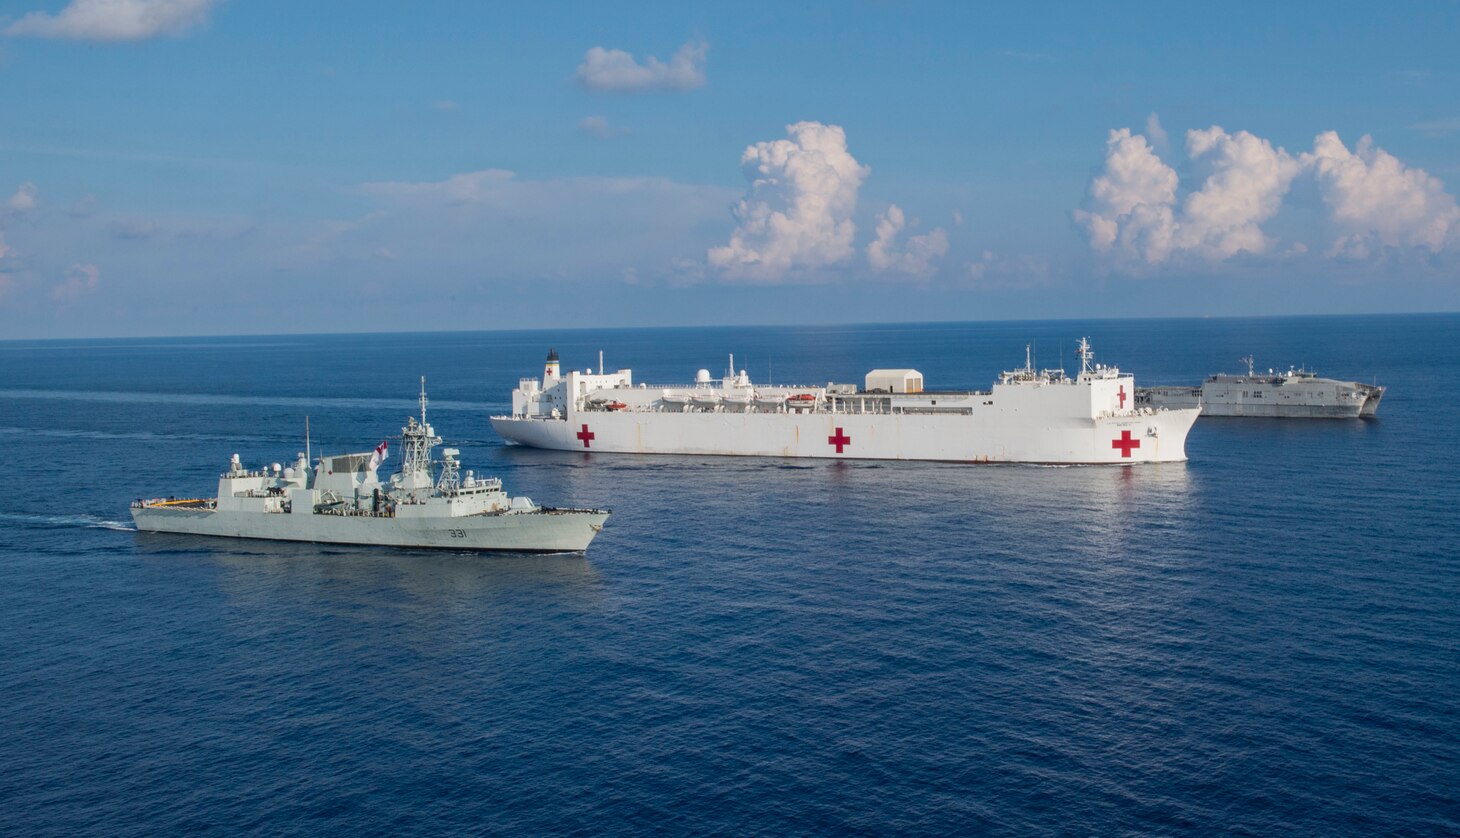 USNS Mercy, Brunswick conduct passing exercise with HMCS Vancouver